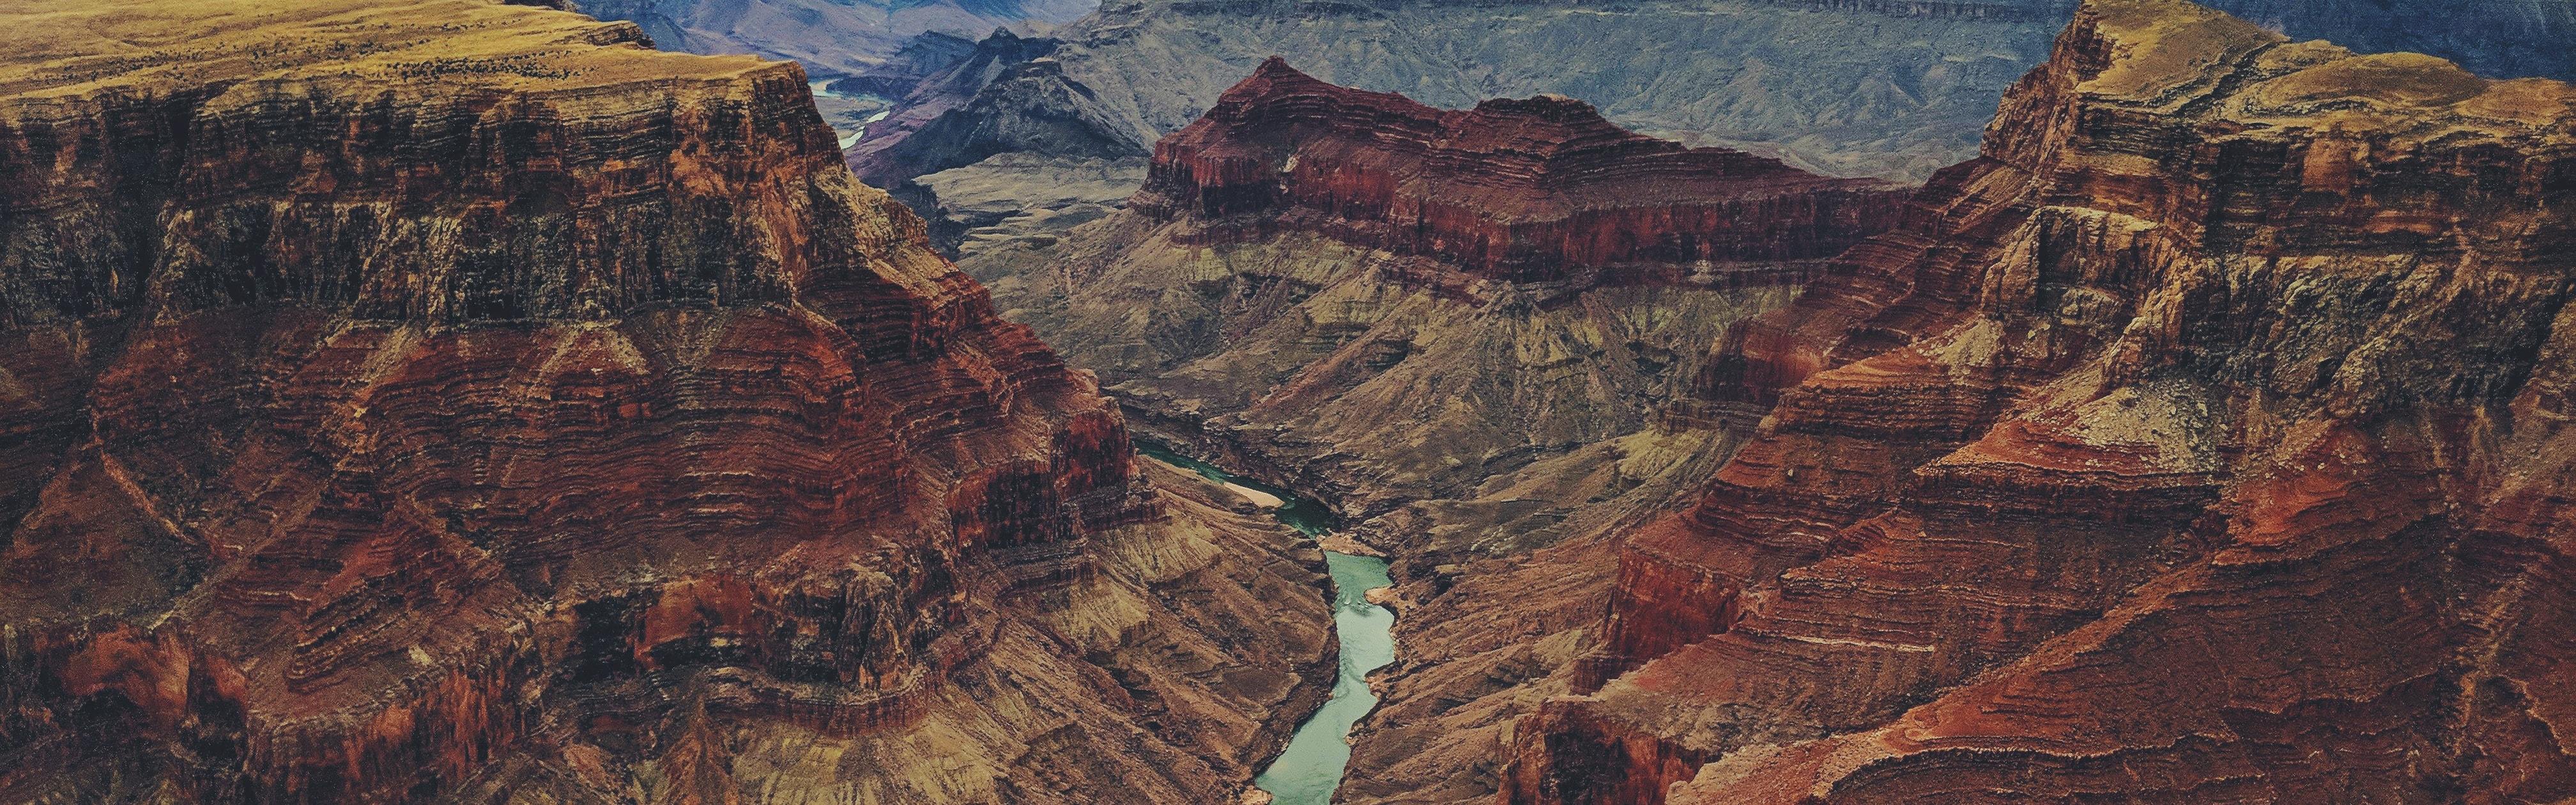 An aerial view of a river snaking through red and yellow canyons